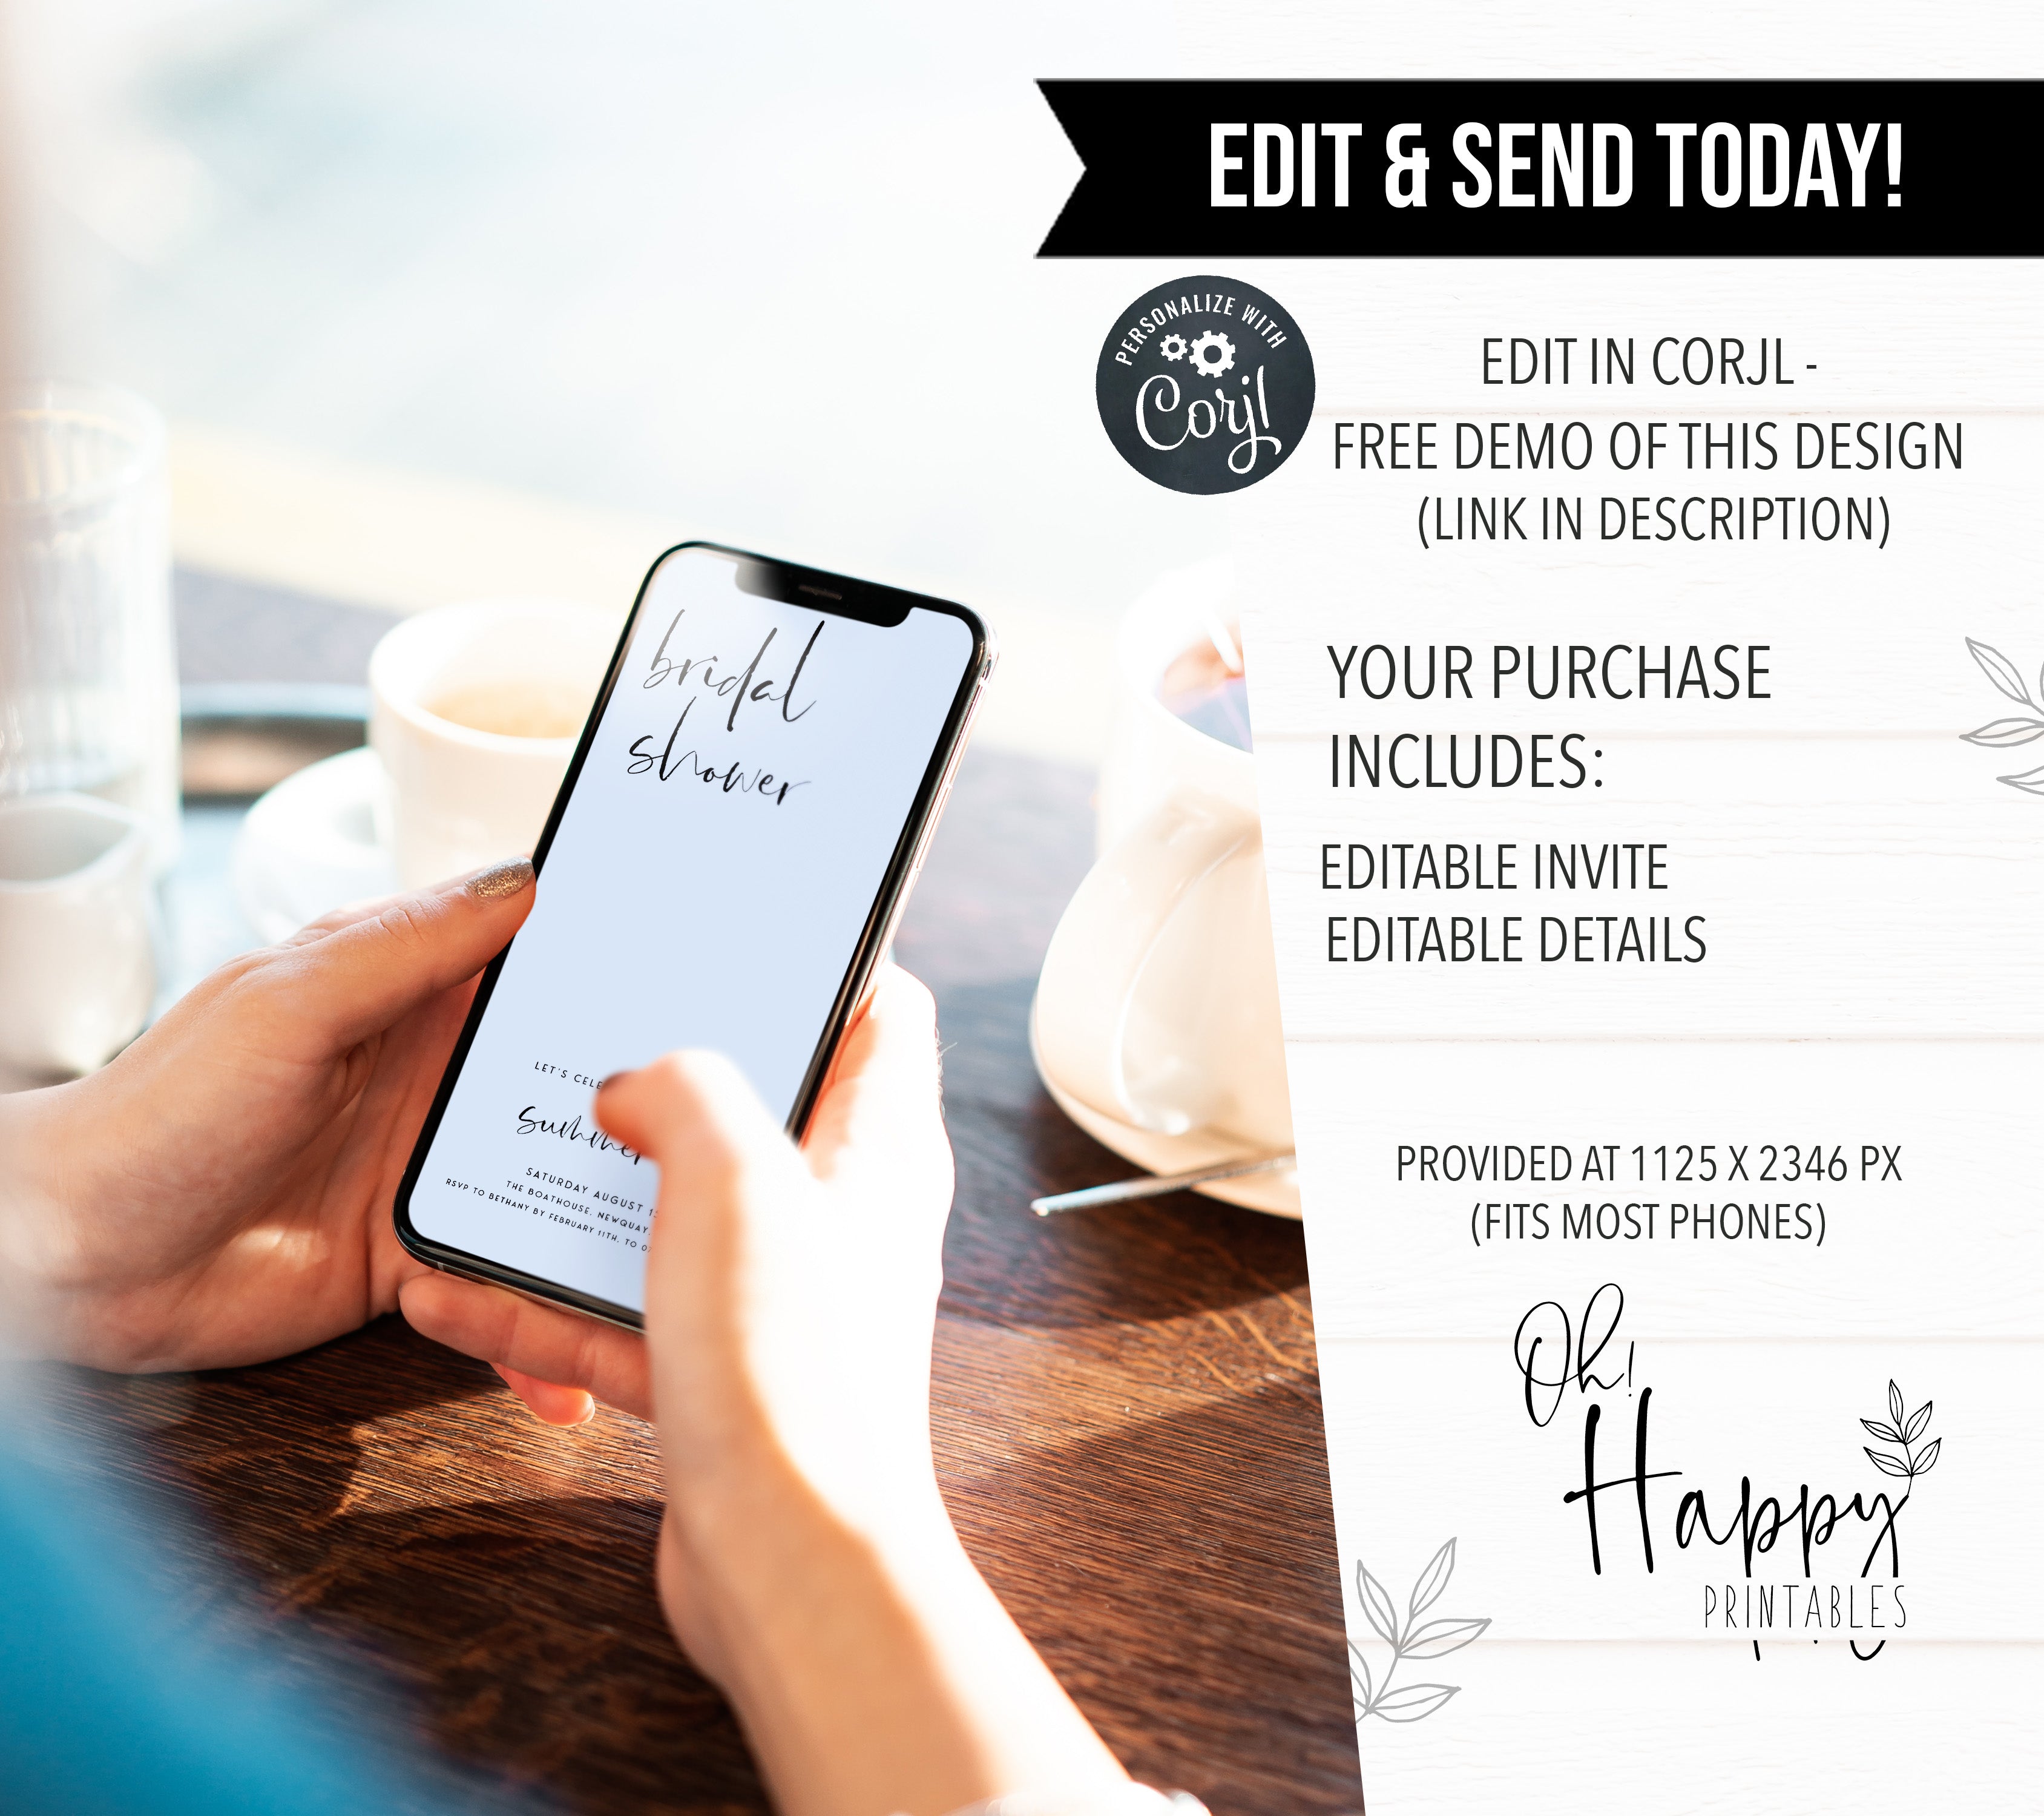 Fully editable and printable bridal shower mobile invitation with a modern minimalist design. Perfect for a modern simple bridal shower themed party